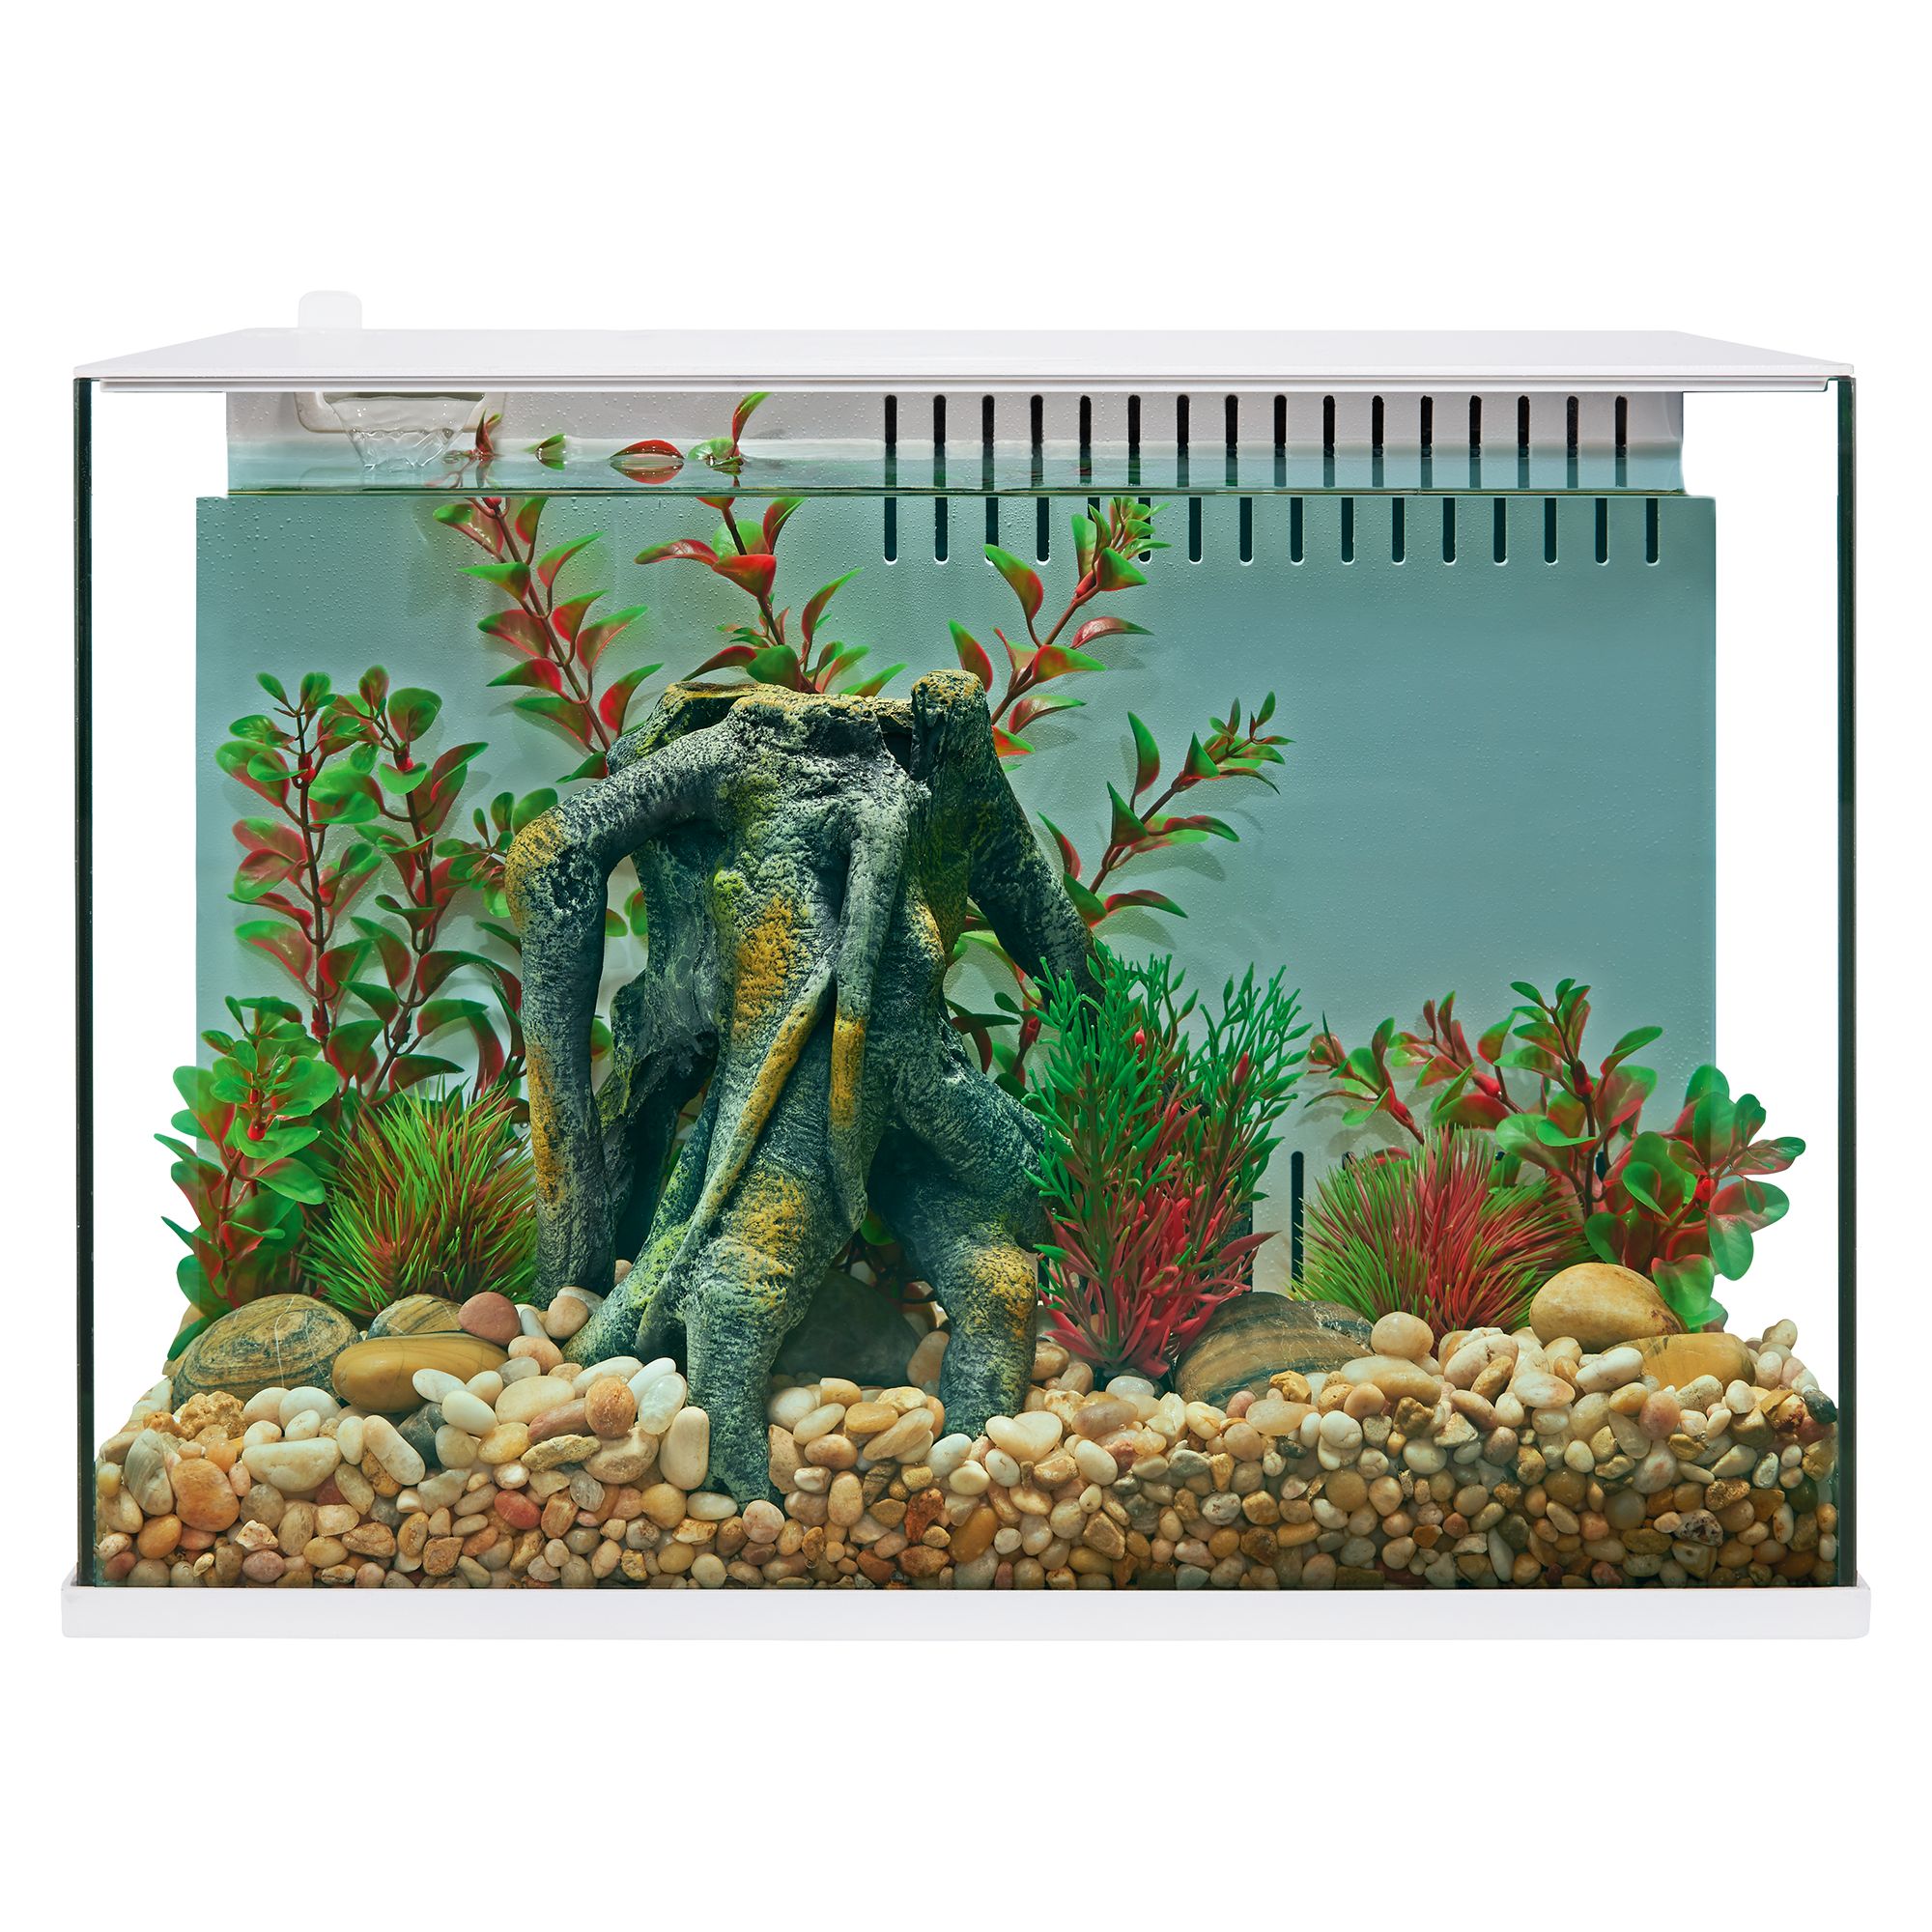 Fish Tanks - Fish Tanks by Gallons - Large (40-99 Gallons) - 60